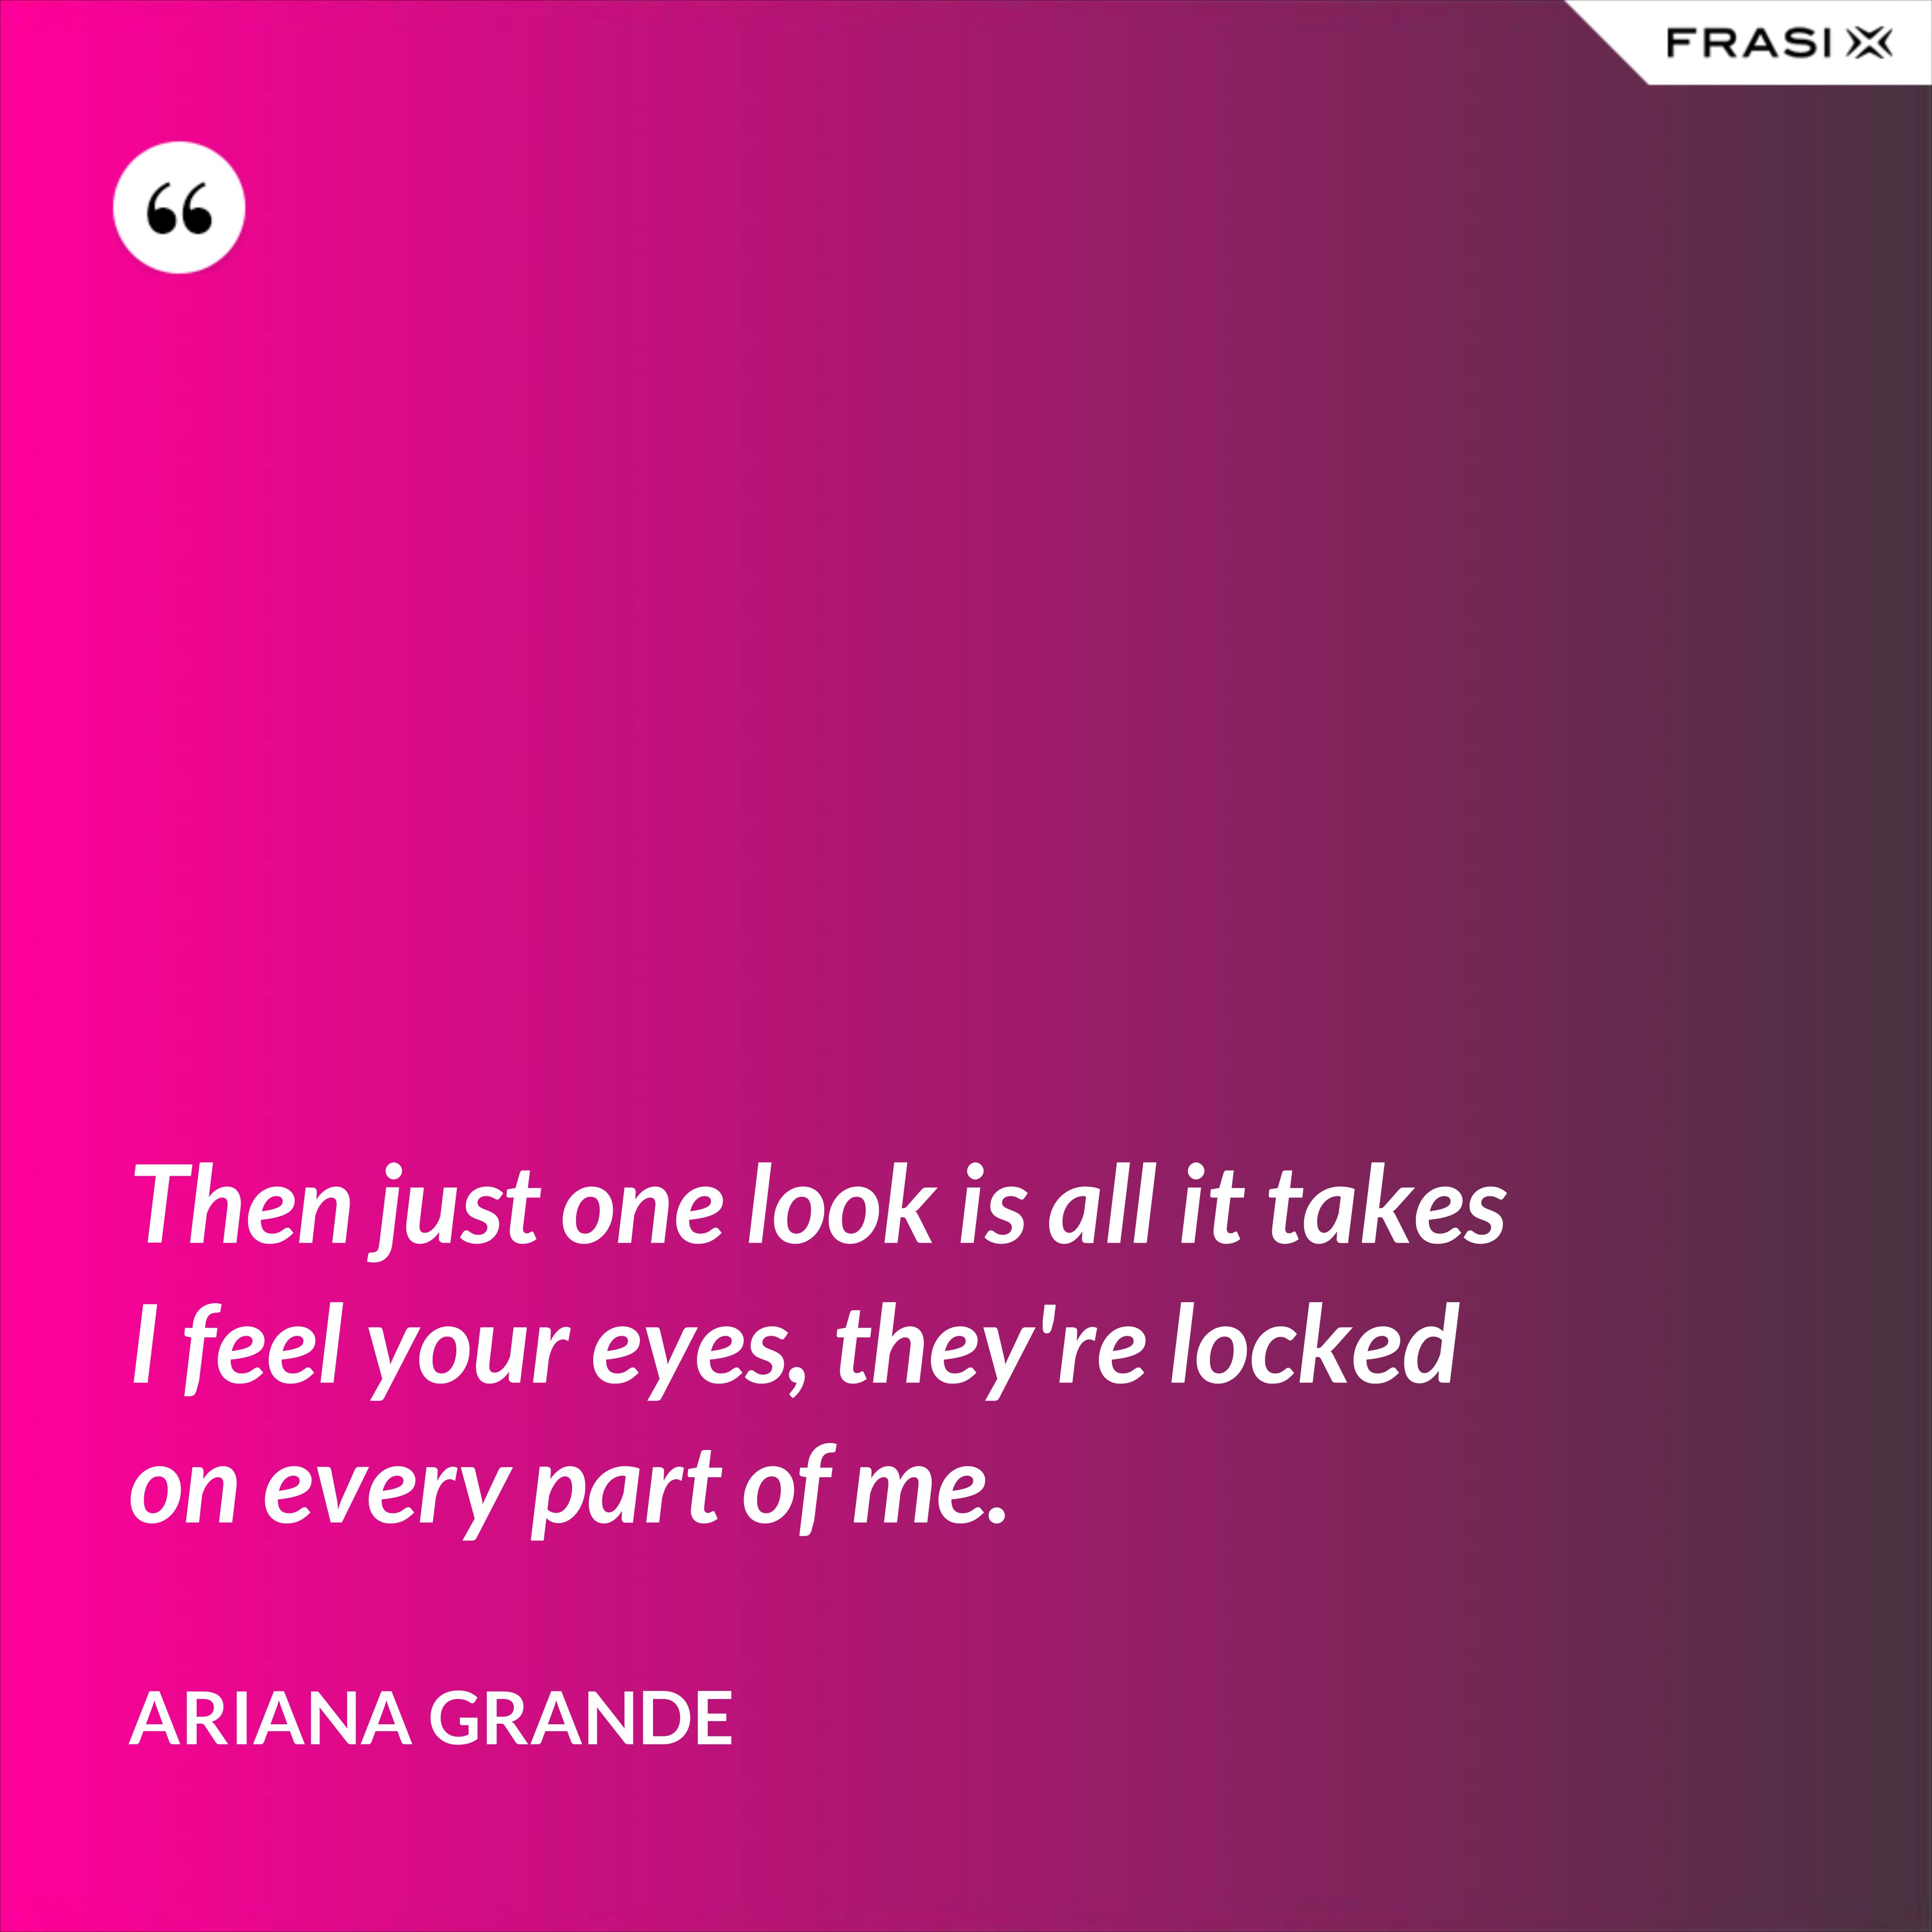 Then just one look is all it takes I feel your eyes, they're locked on every part of me. - Ariana Grande